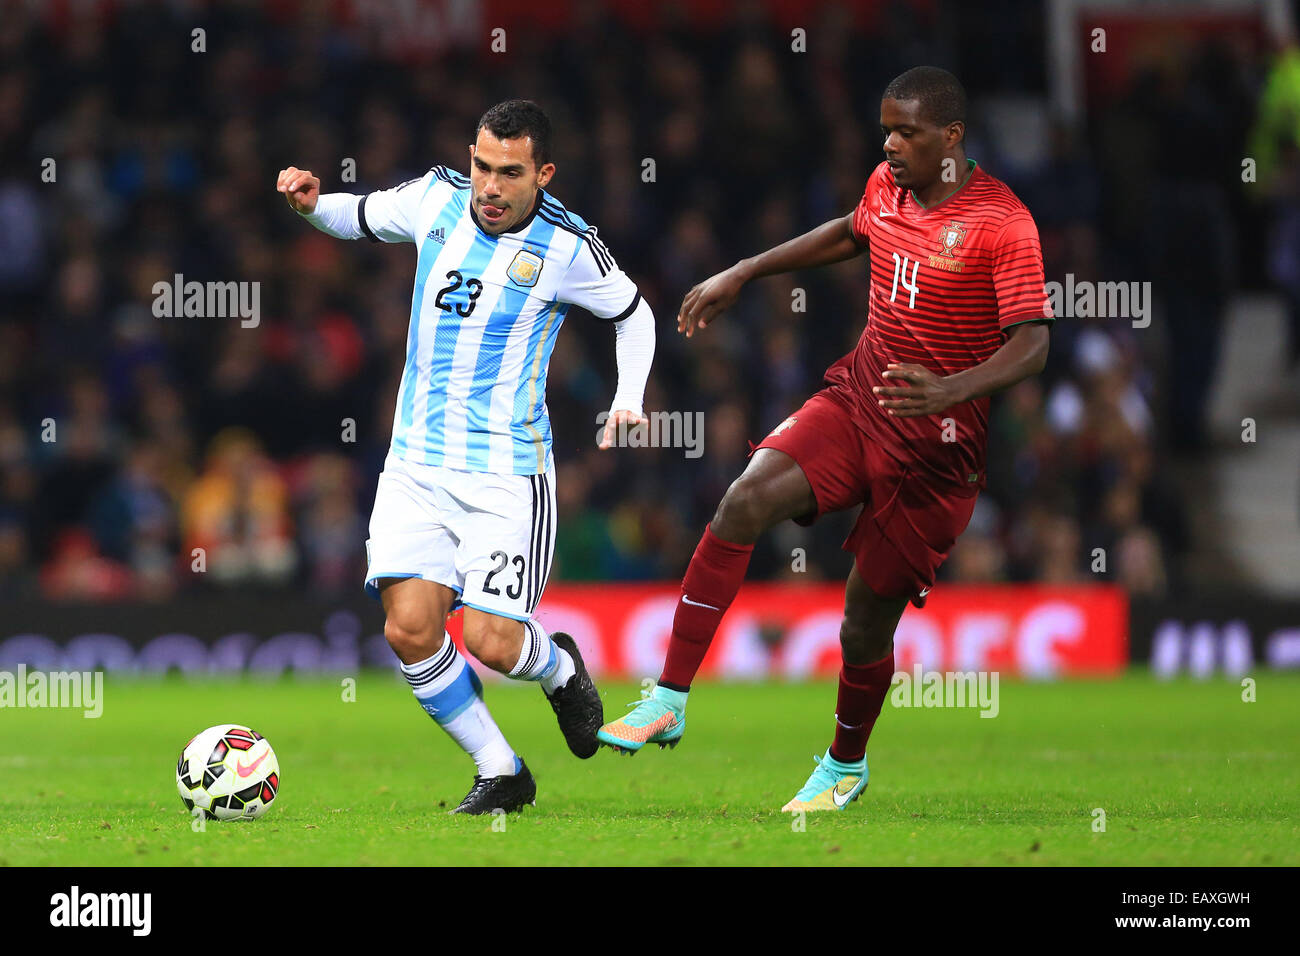 Nov. 18, 2014 - Manchester, United Kingdom - Carlos Tevez of Argentina and William Carvalho of Portugal - Argentina vs. Portugal - International Friendly - Old Trafford - Manchester - 18/11/2014 Pic Philip Oldham/Sportimage. Stock Photo